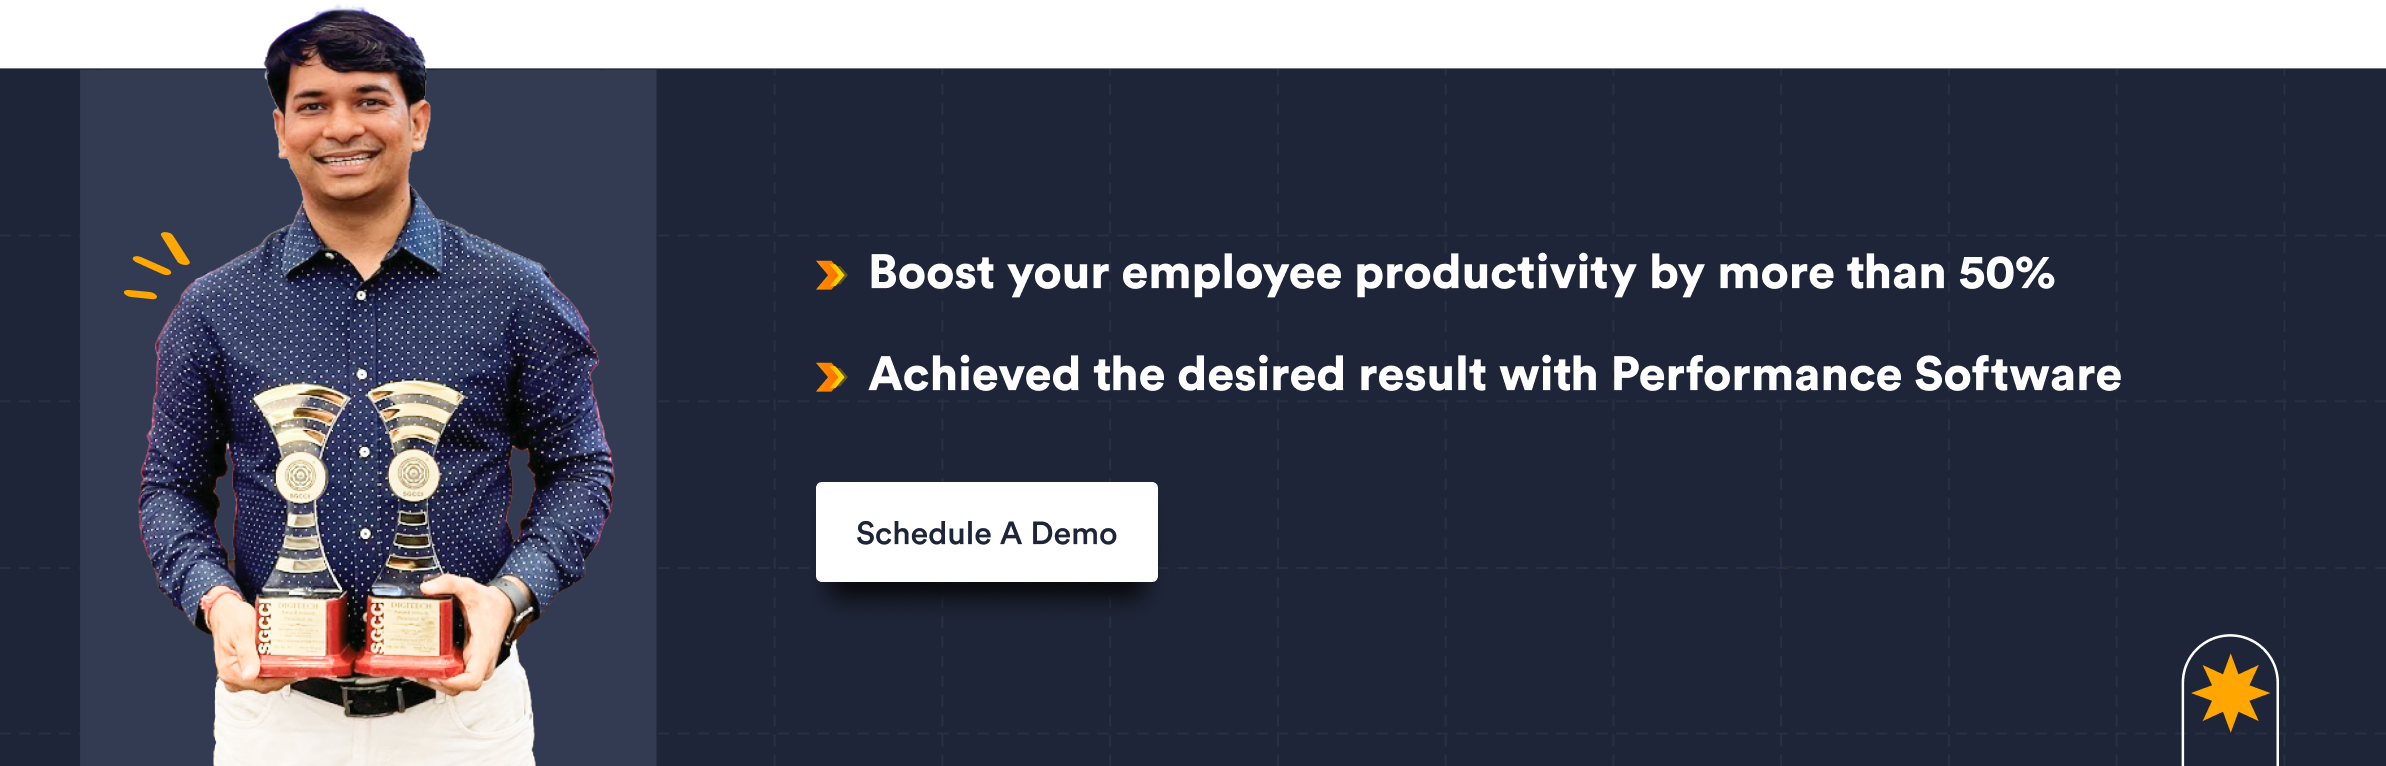 Boost your employee productivity by more than 50